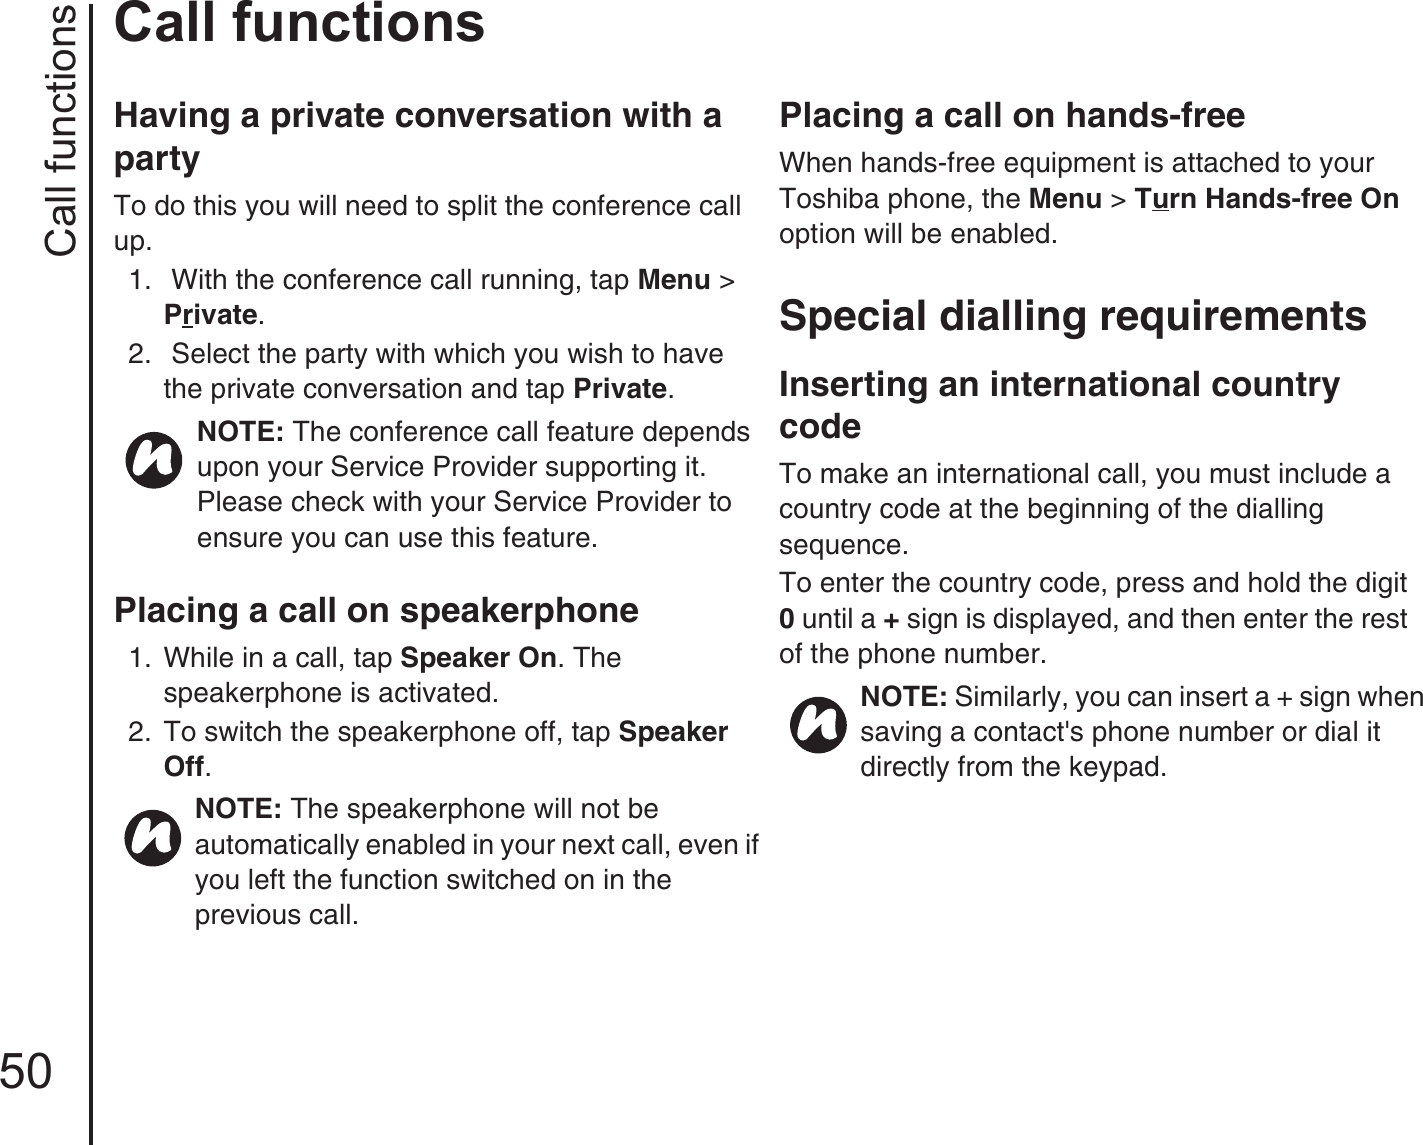 Call functions50Call functionsHaving a private conversation with a partyTo do this you will need to split the conference call up.1.   With the conference call running, tap Menu &gt; Private.2.   Select the party with which you wish to have the private conversation and tap Private.Placing a call on speakerphone1.  While in a call, tap Speaker On. The speakerphone is activated.2.  To switch the speakerphone off, tap Speaker Off.Placing a call on hands-freeWhen hands-free equipment is attached to your Toshiba phone, the Menu &gt; Turn Hands-free On option will be enabled.Special dialling requirementsInserting an international country codeTo make an international call, you must include a country code at the beginning of the dialling sequence. To enter the country code, press and hold the digit 0 until a + sign is displayed, and then enter the rest of the phone number. NOTE: The conference call feature depends upon your Service Provider supporting it. Please check with your Service Provider to ensure you can use this feature.NOTE: The speakerphone will not be automatically enabled in your next call, even if you left the function switched on in the            previous call.NOTE: Similarly, you can insert a + sign when saving a contact&apos;s phone number or dial it directly from the keypad.